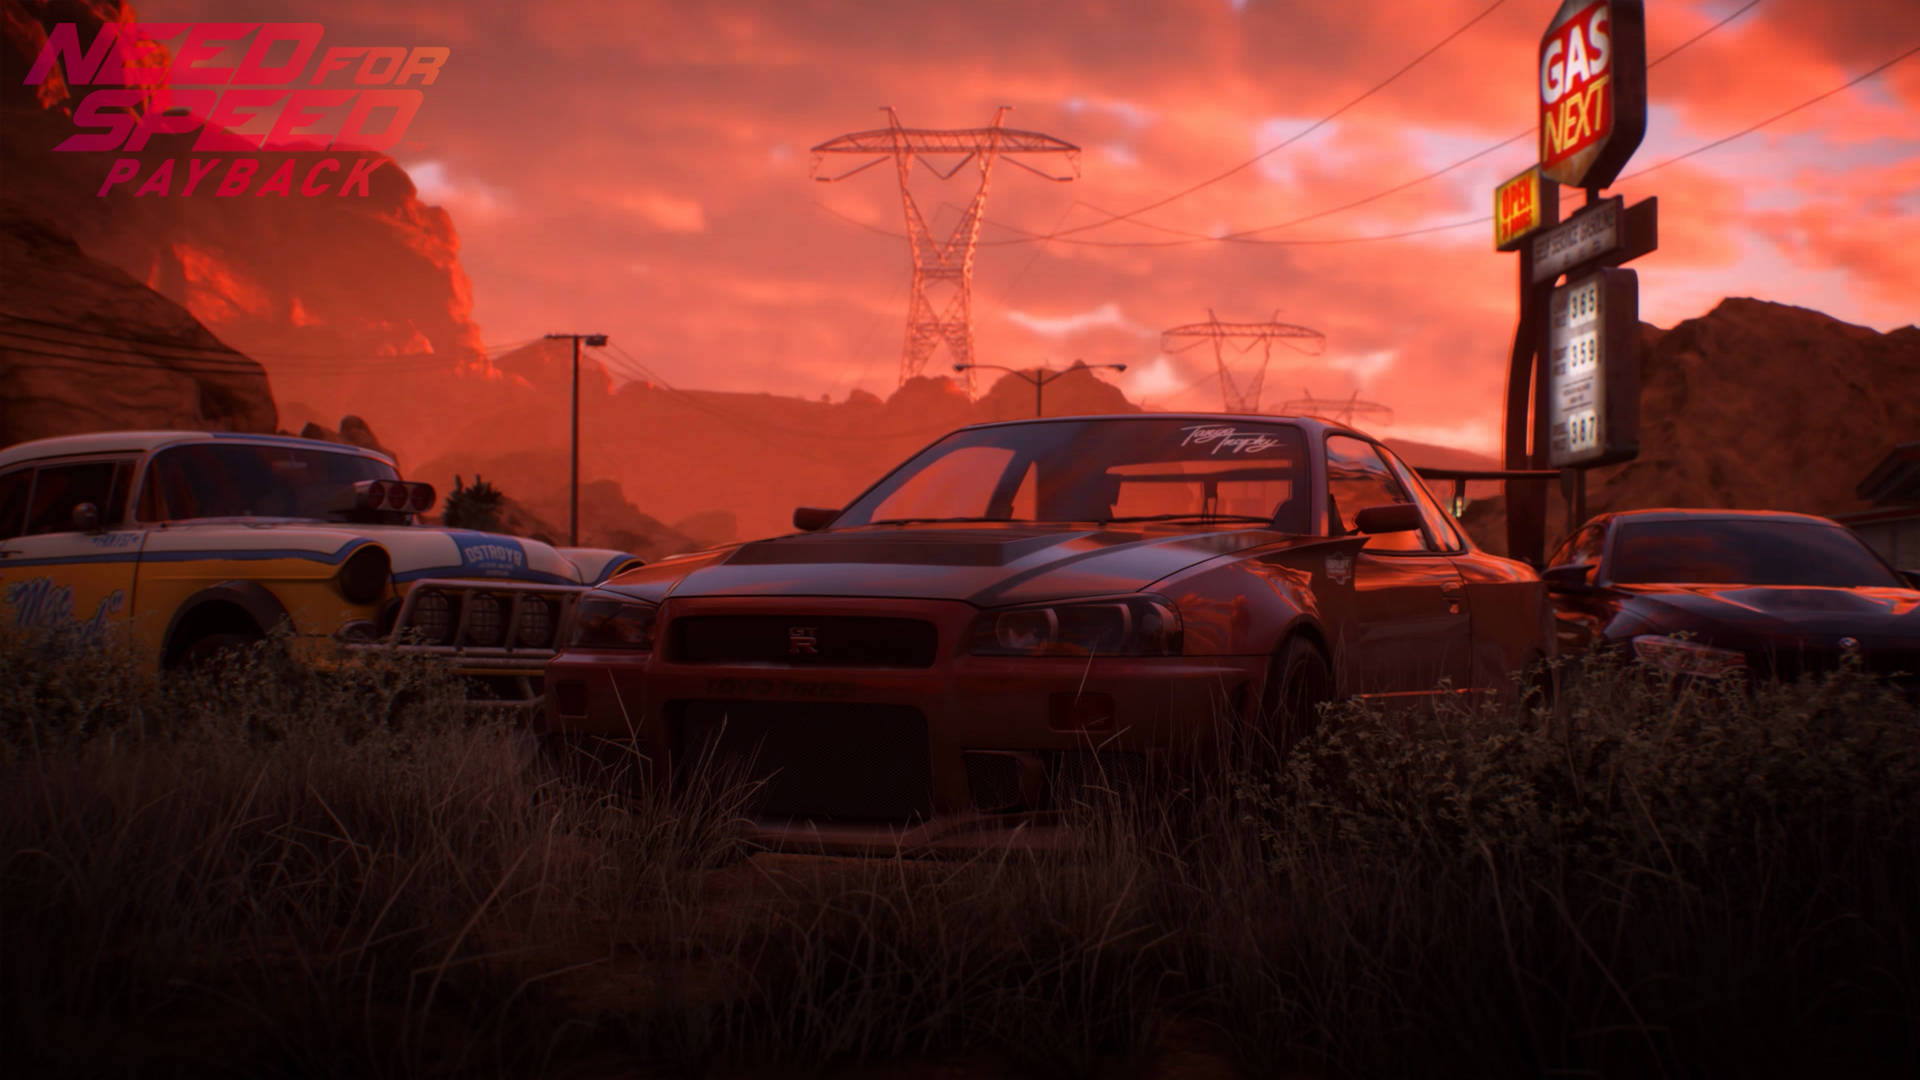 Need For Speed Payback Gas Station Sunset Background